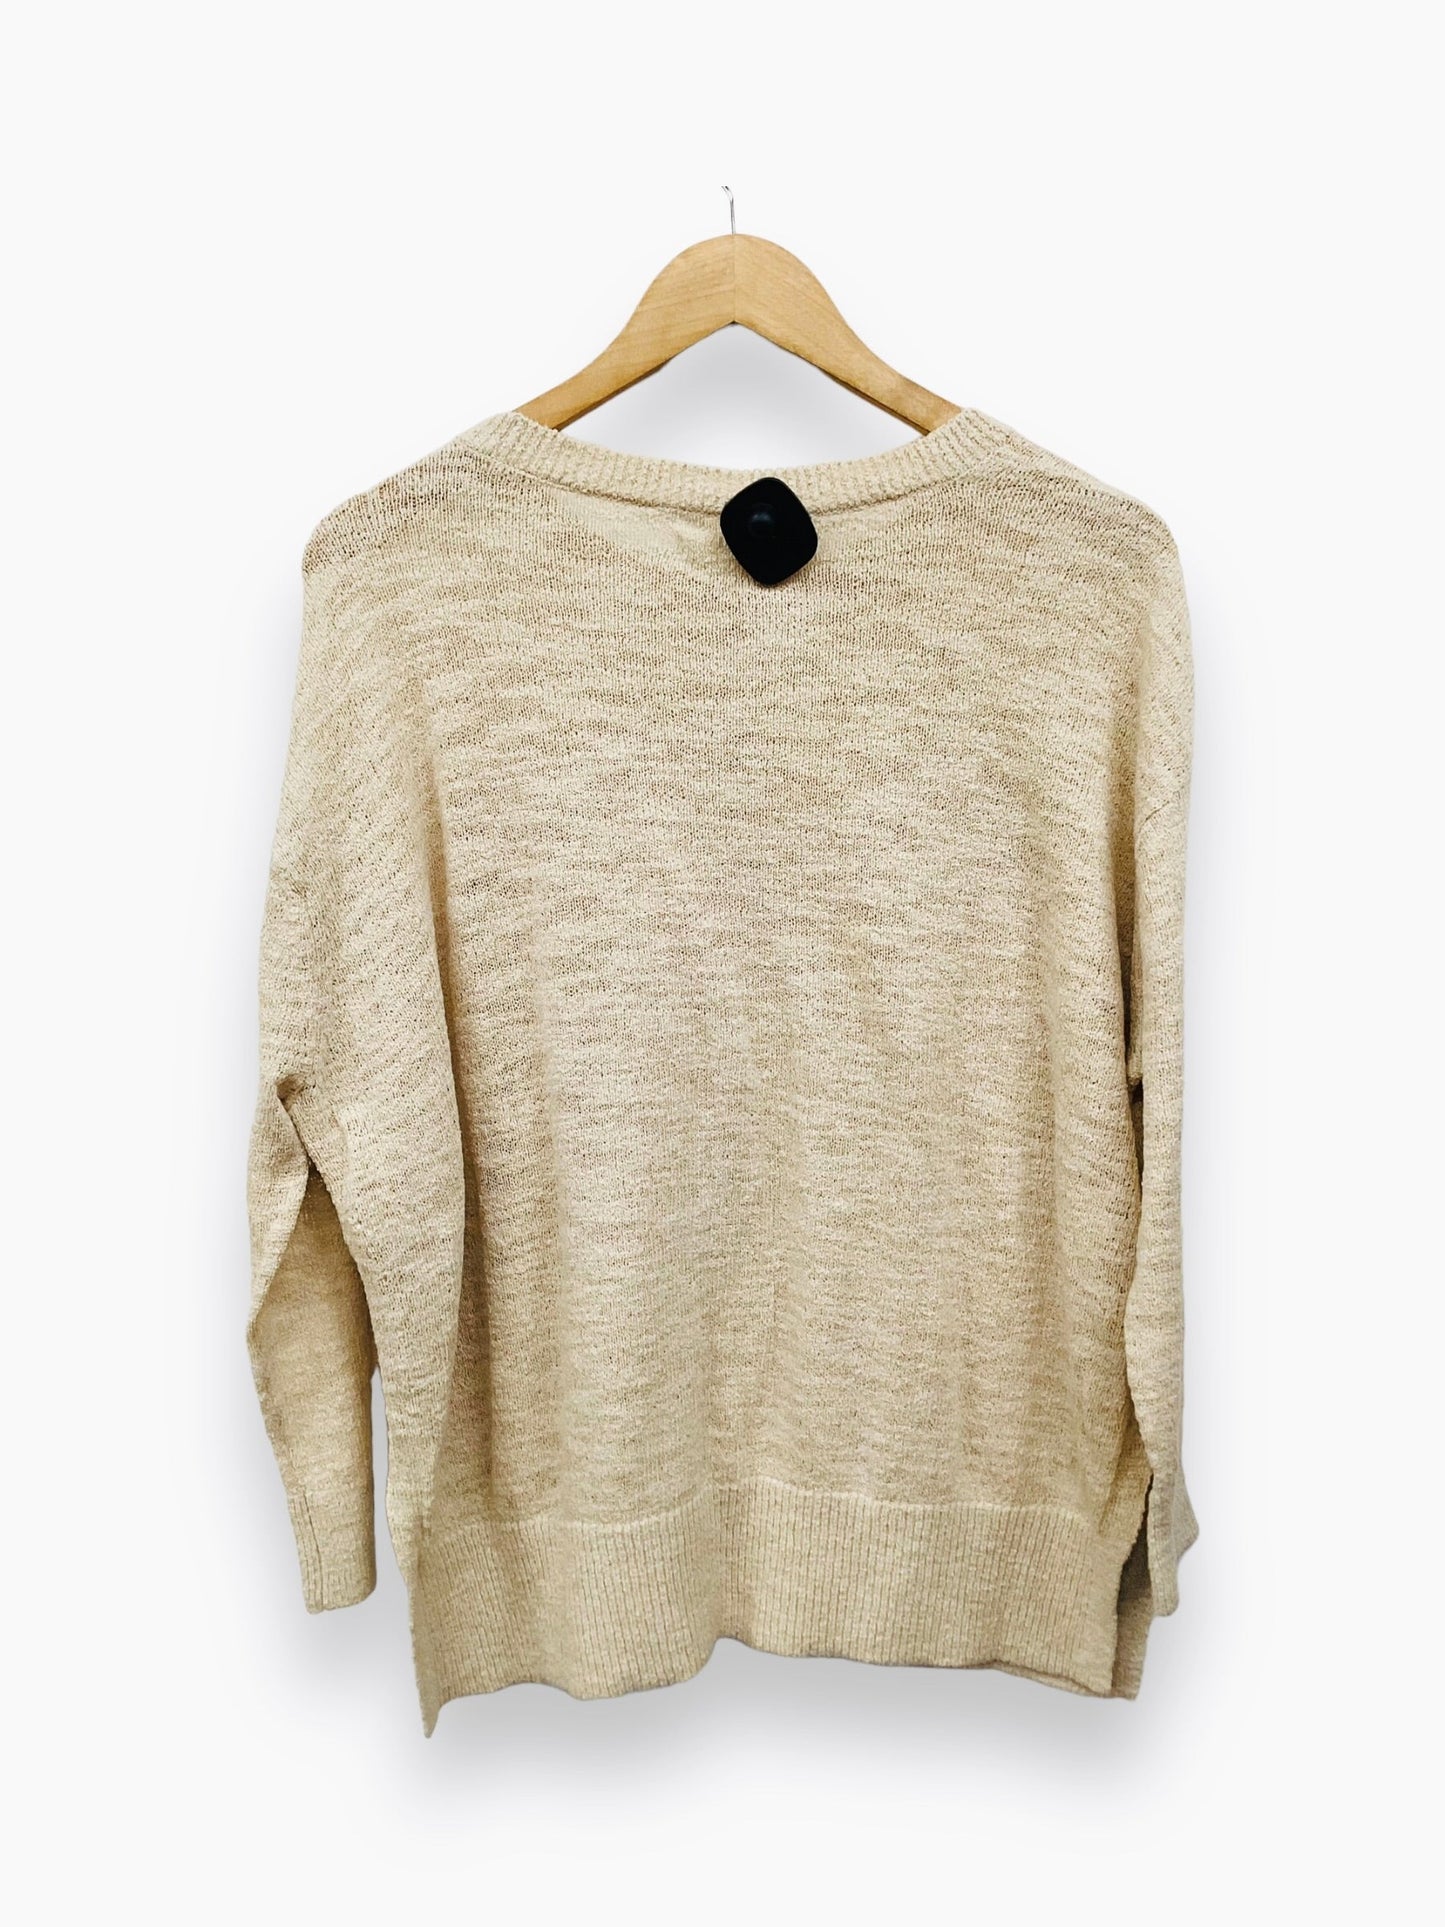 Tan Sweater Lou And Grey, Size S